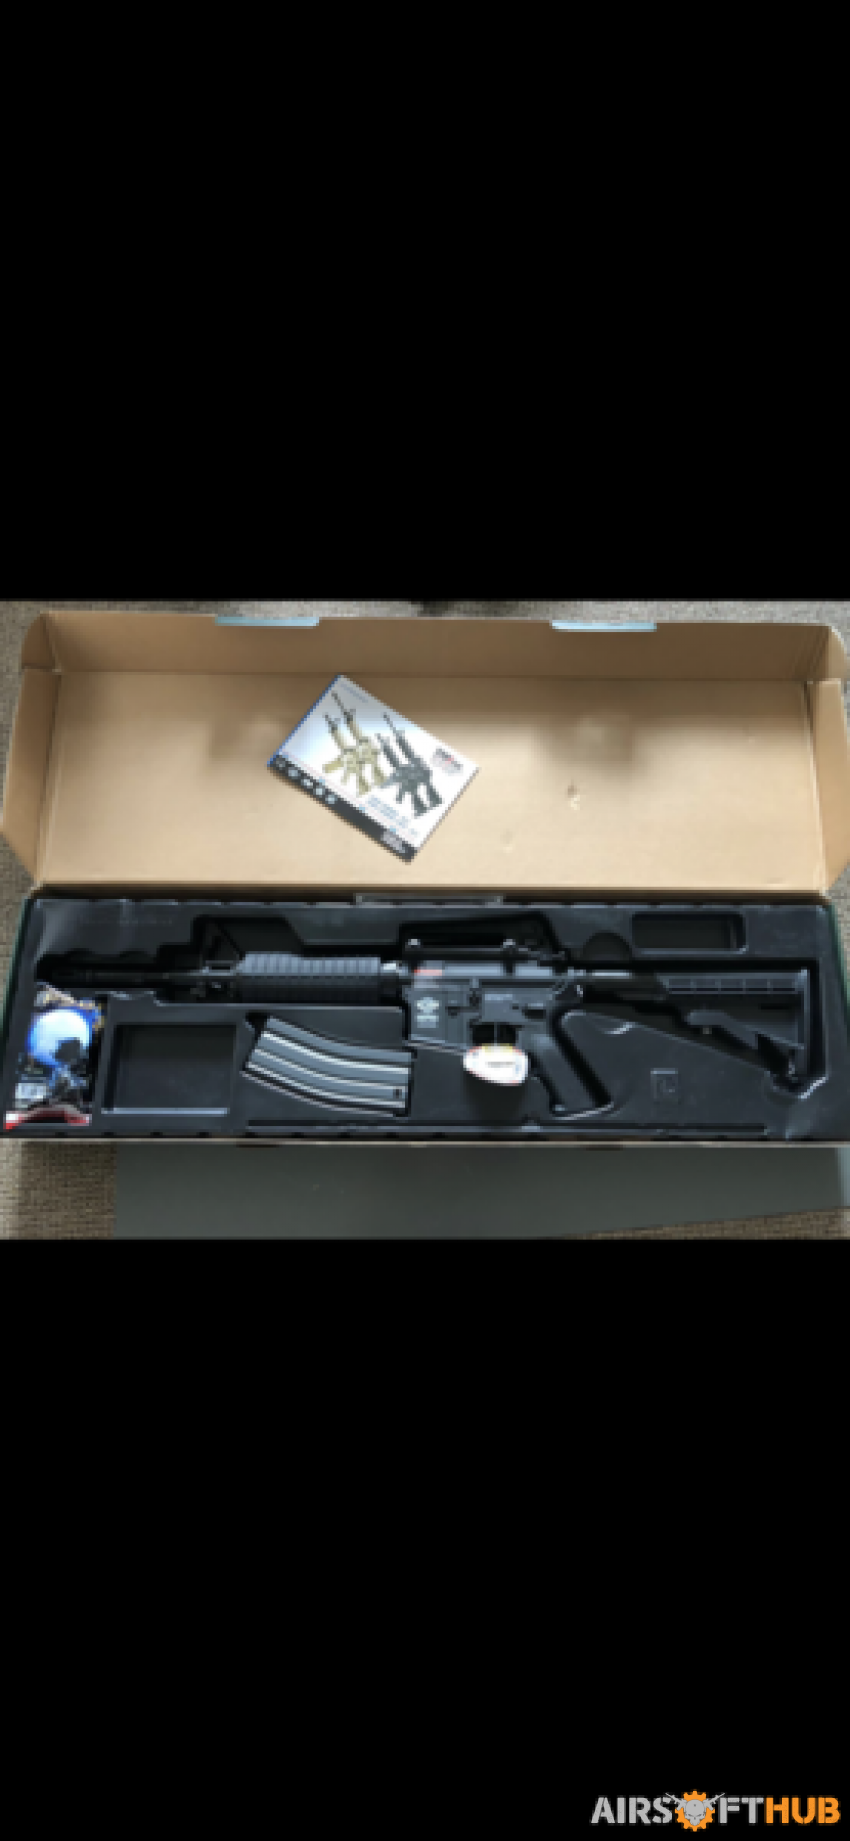 G&G ARMAMENT CM16 CARABINE - Used airsoft equipment